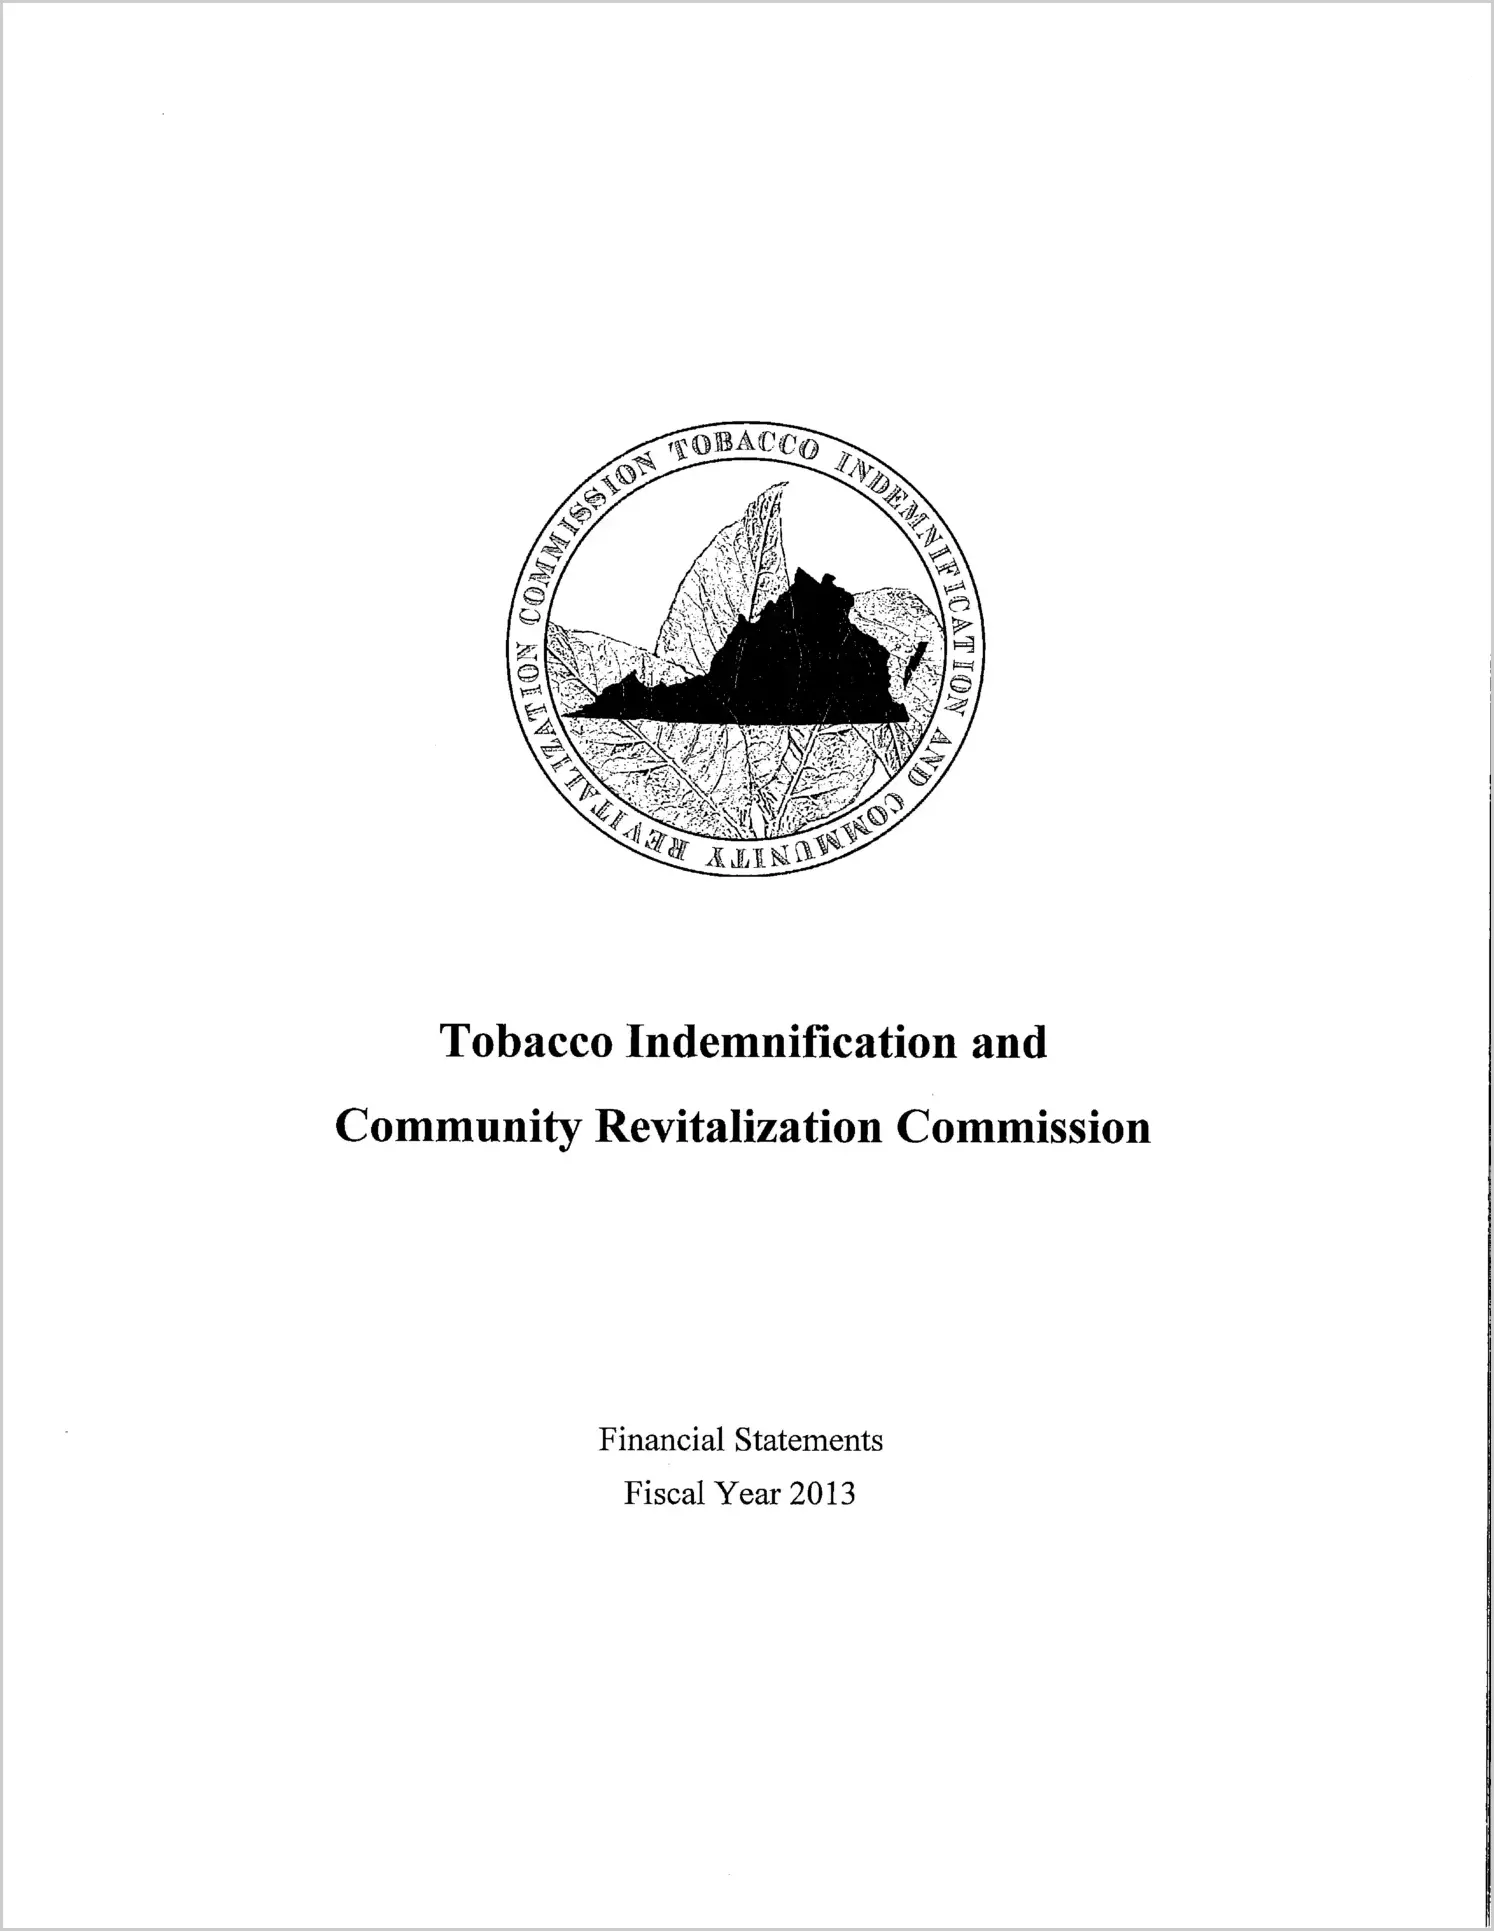 Tobacco Indemnification and Community Revitalization Commission Financial Statement for the year ended June 30, 2013